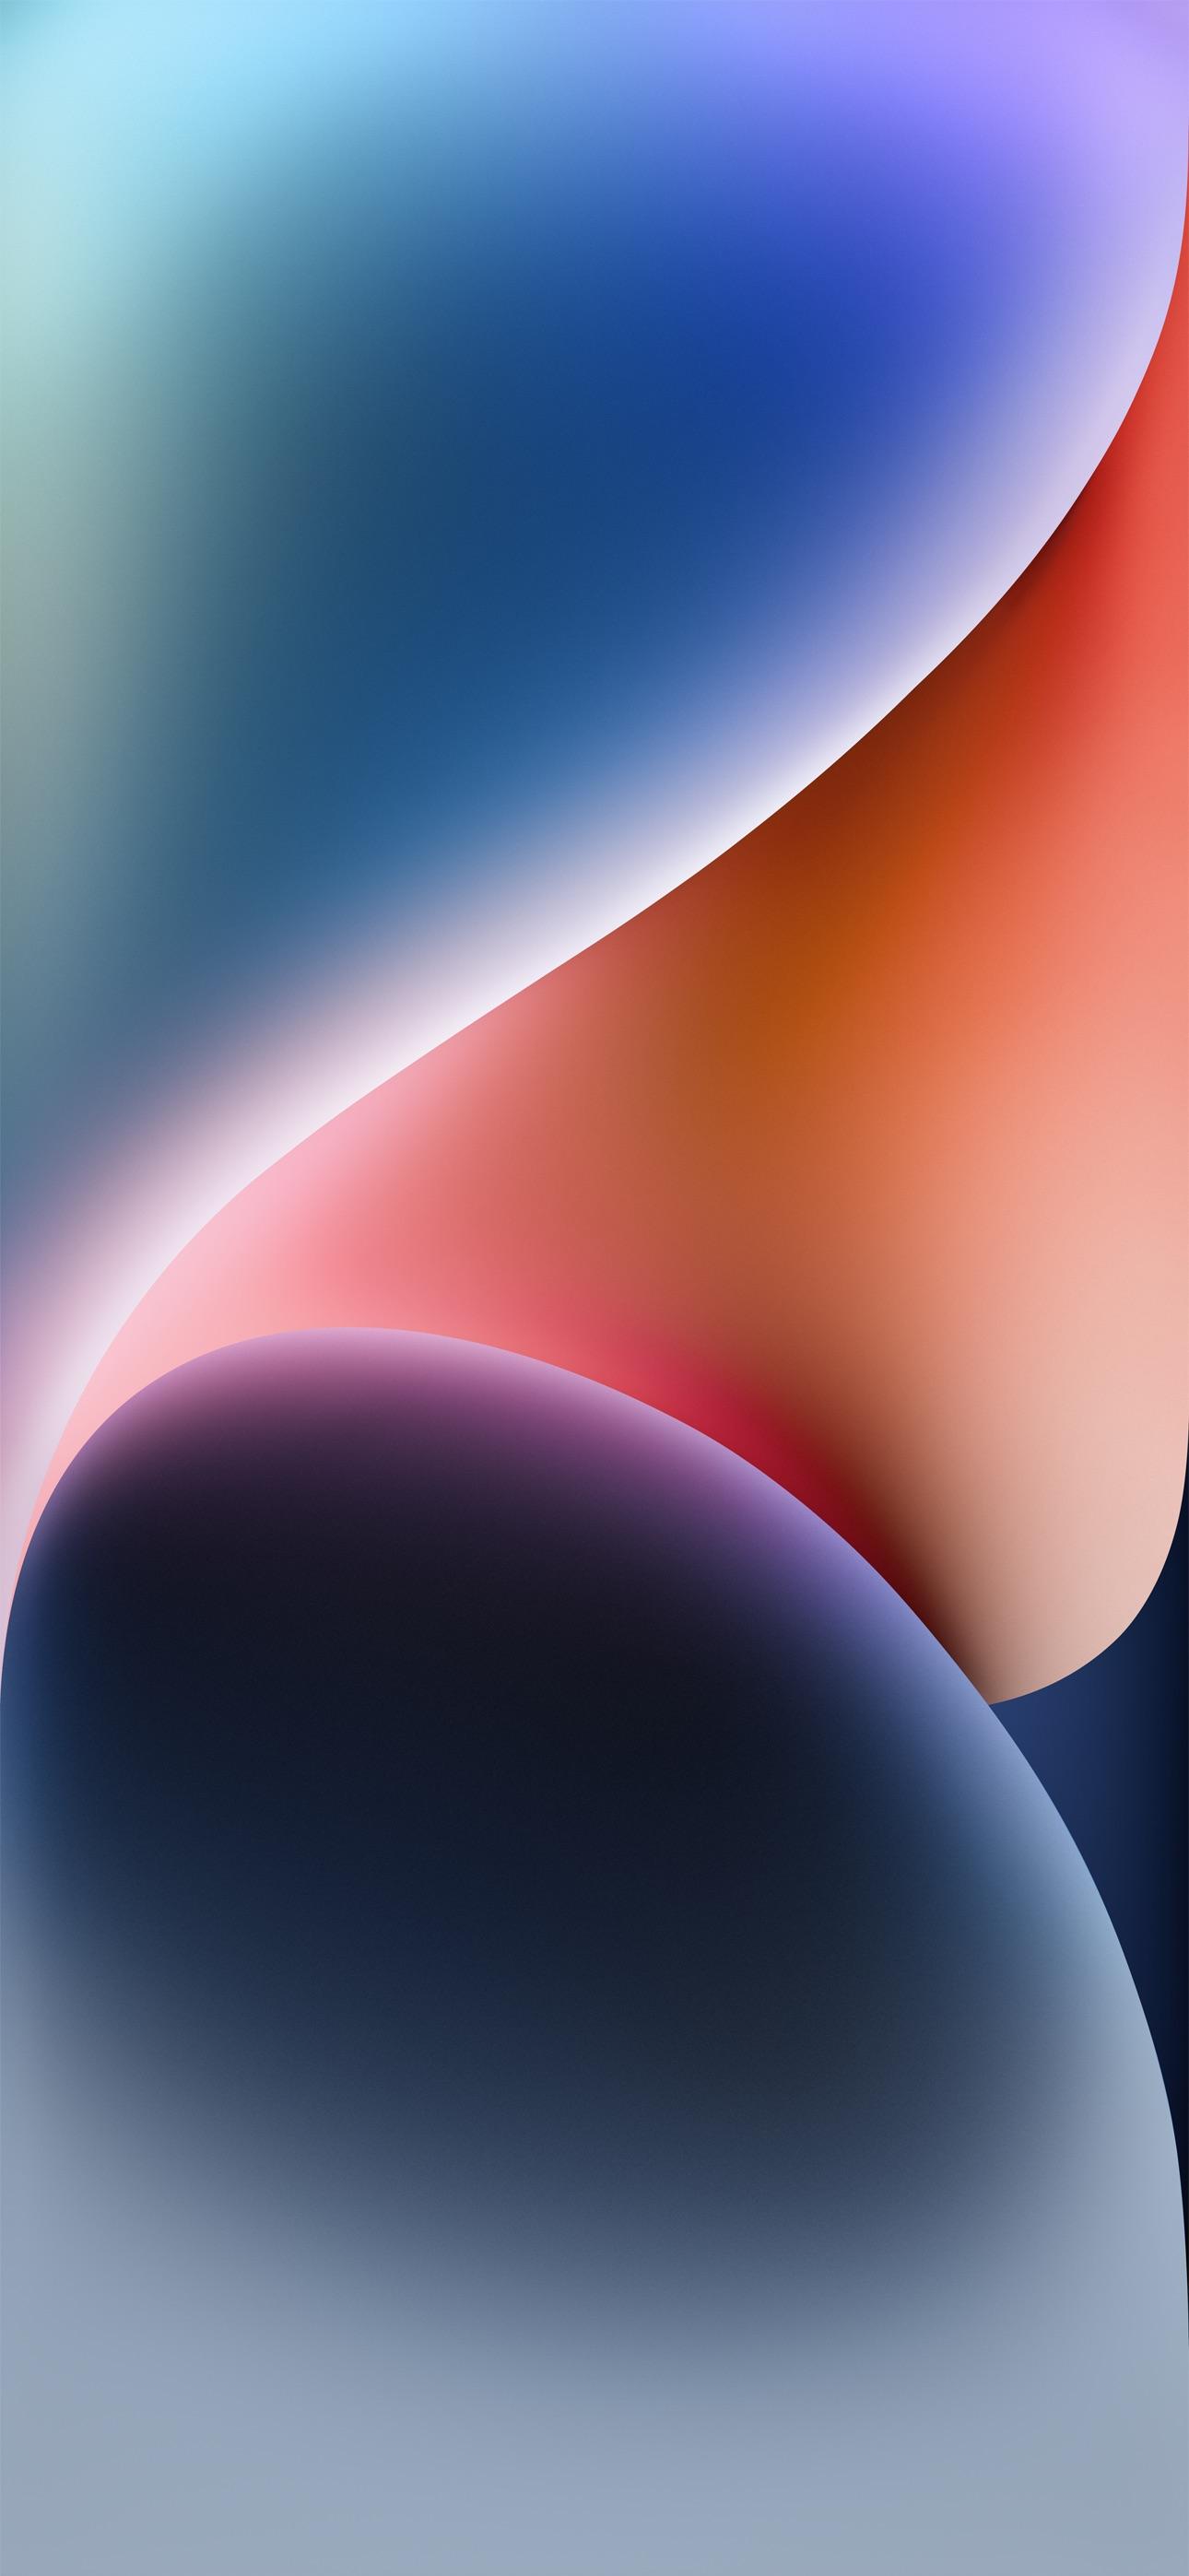 Download the iPhone 14 and 14 Pro wallpapers here   9to5Mac